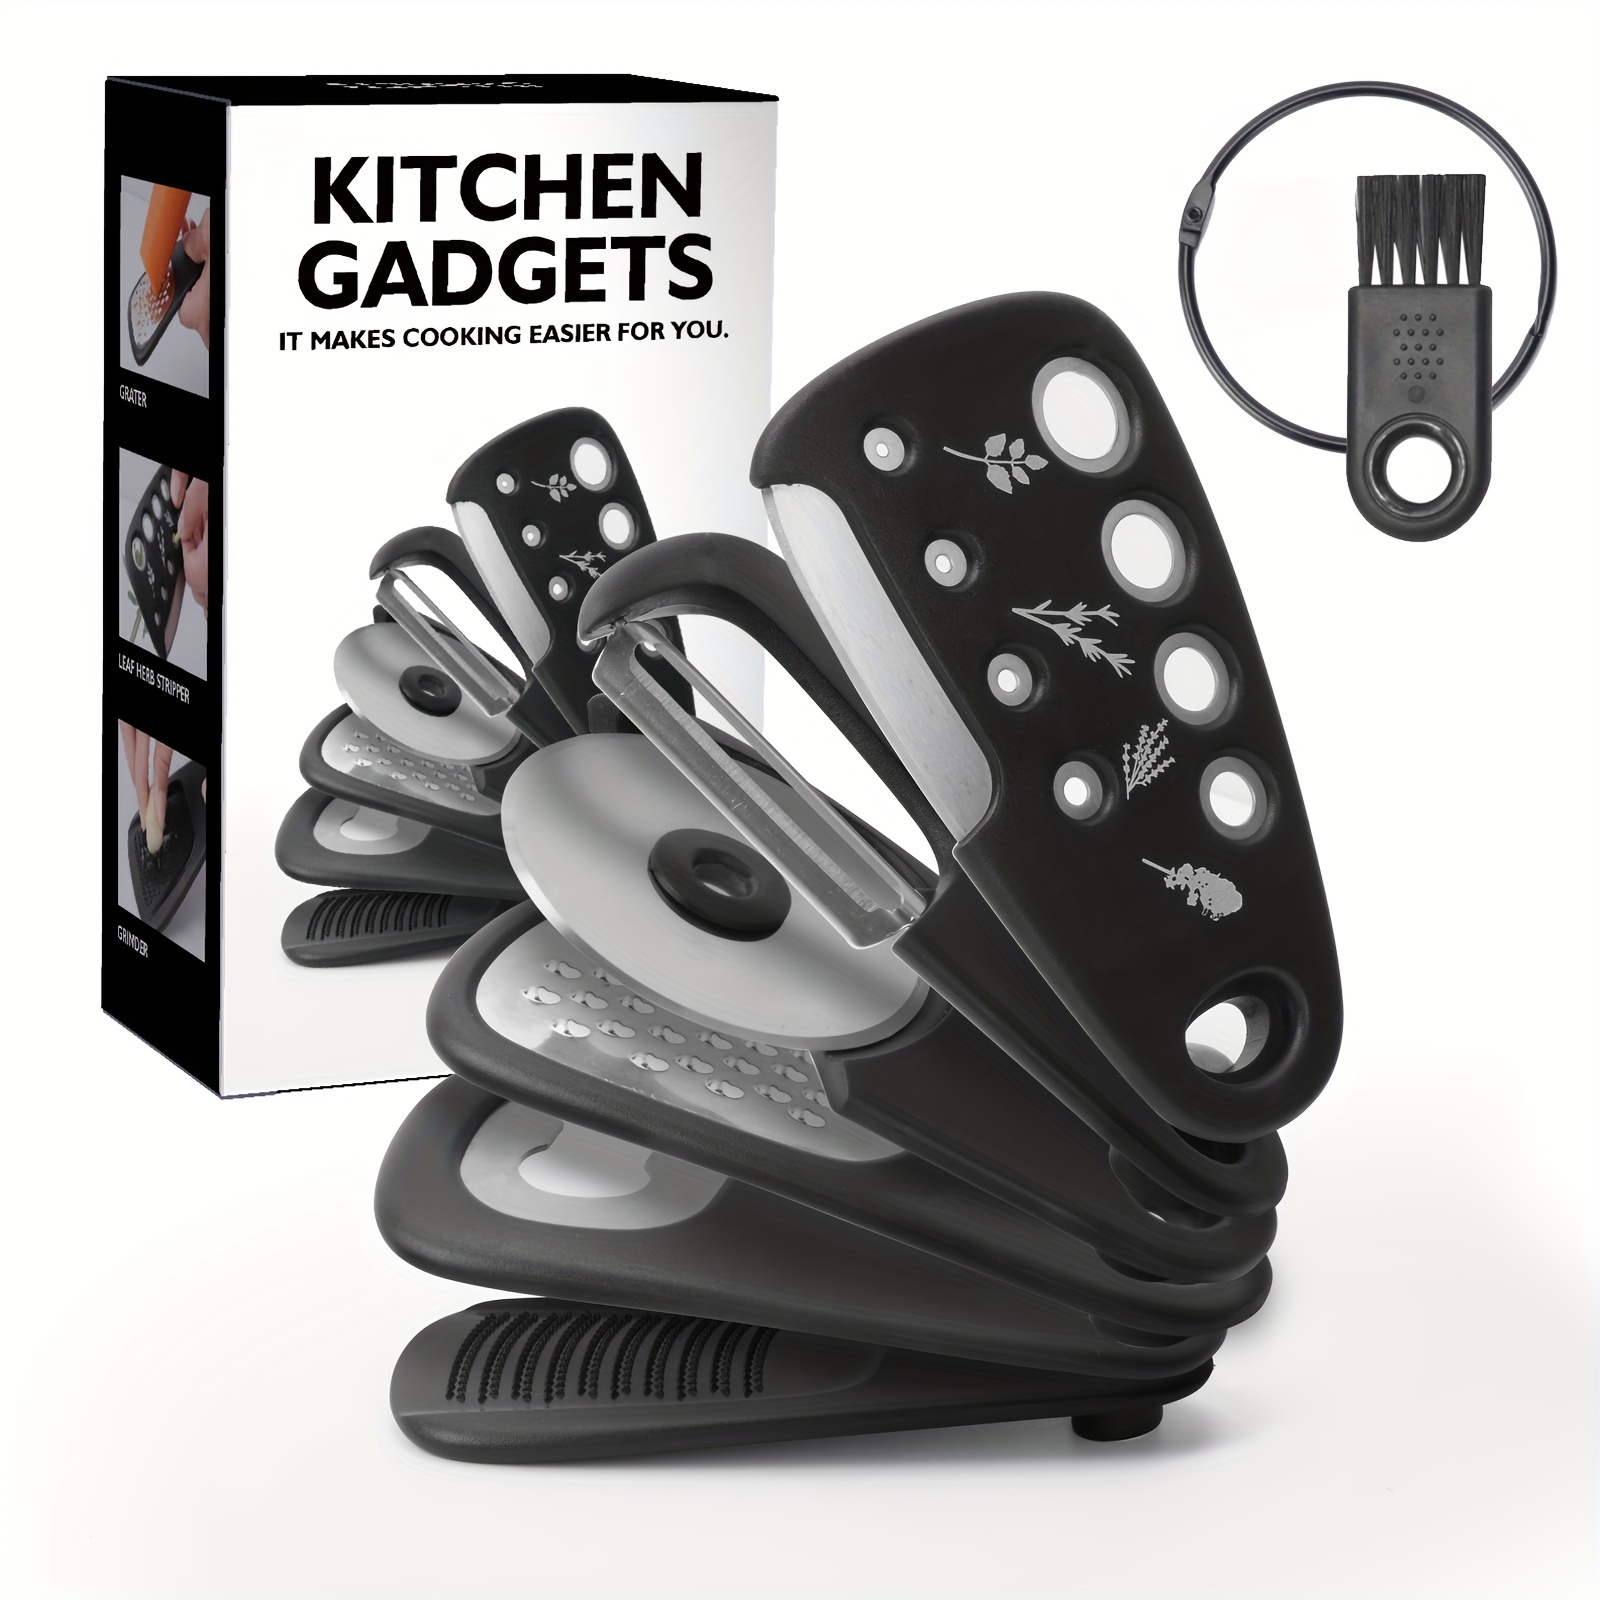 6 Cool Kitchen Items That Will Make Cook